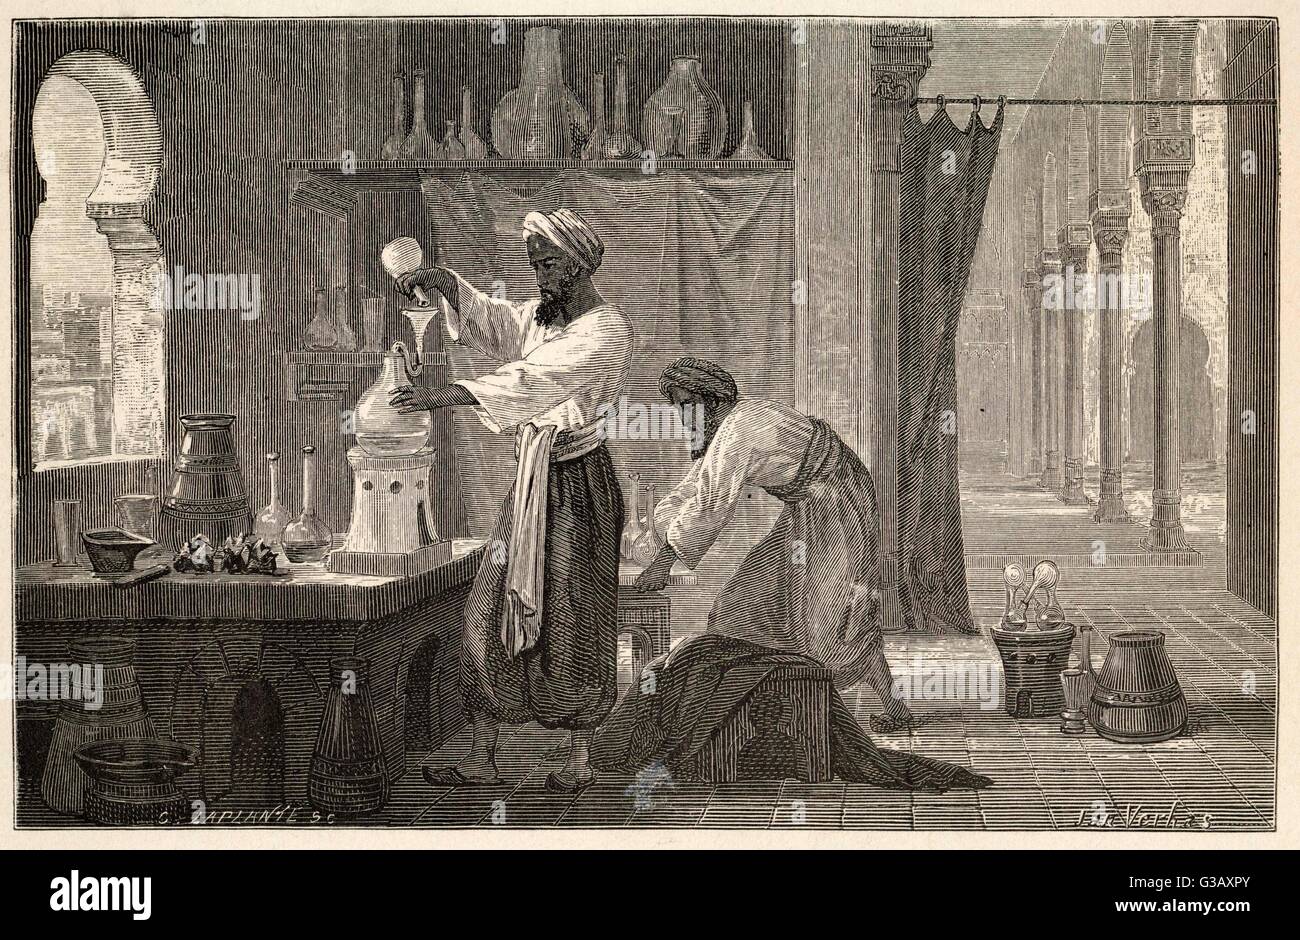 Abu Bakr Muhammad ibn Zakariya' al-Razi, known by Latin form  Rhazes. Persian physician, clinician and philosopher depicted in his laboratory in Baghdad.       Date: 10th century Stock Photo